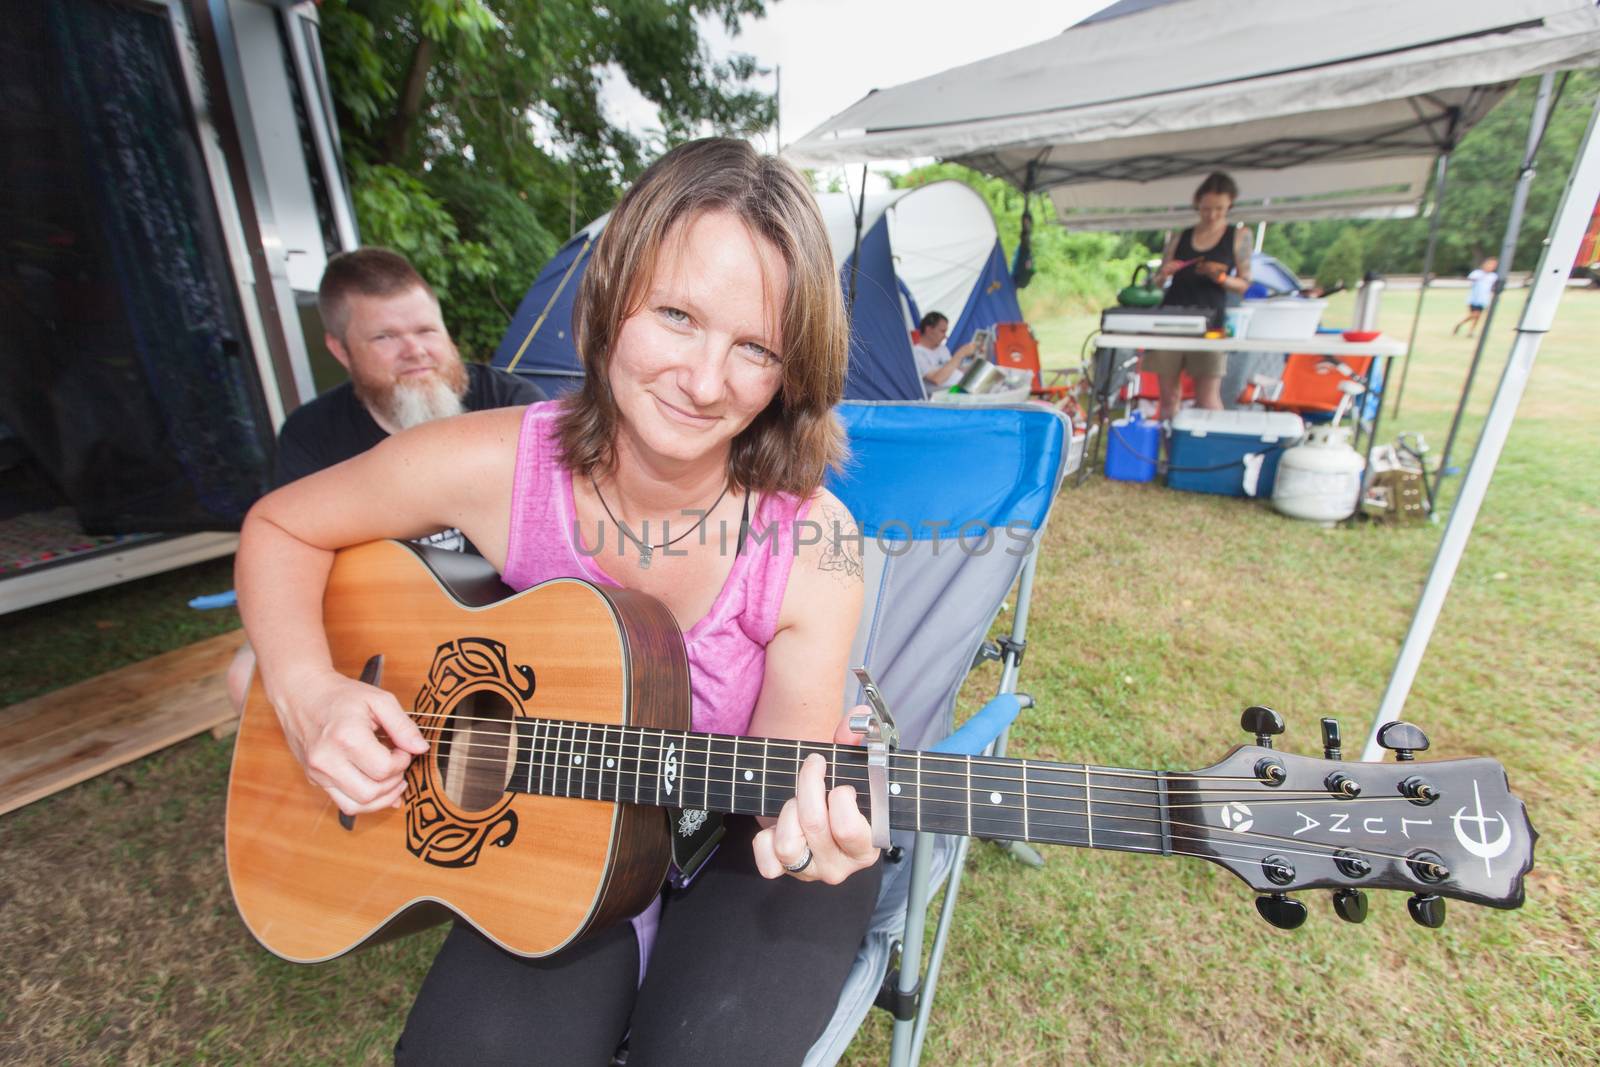 Woman Playing Guitar at the Wild Goose Festival by Creatista